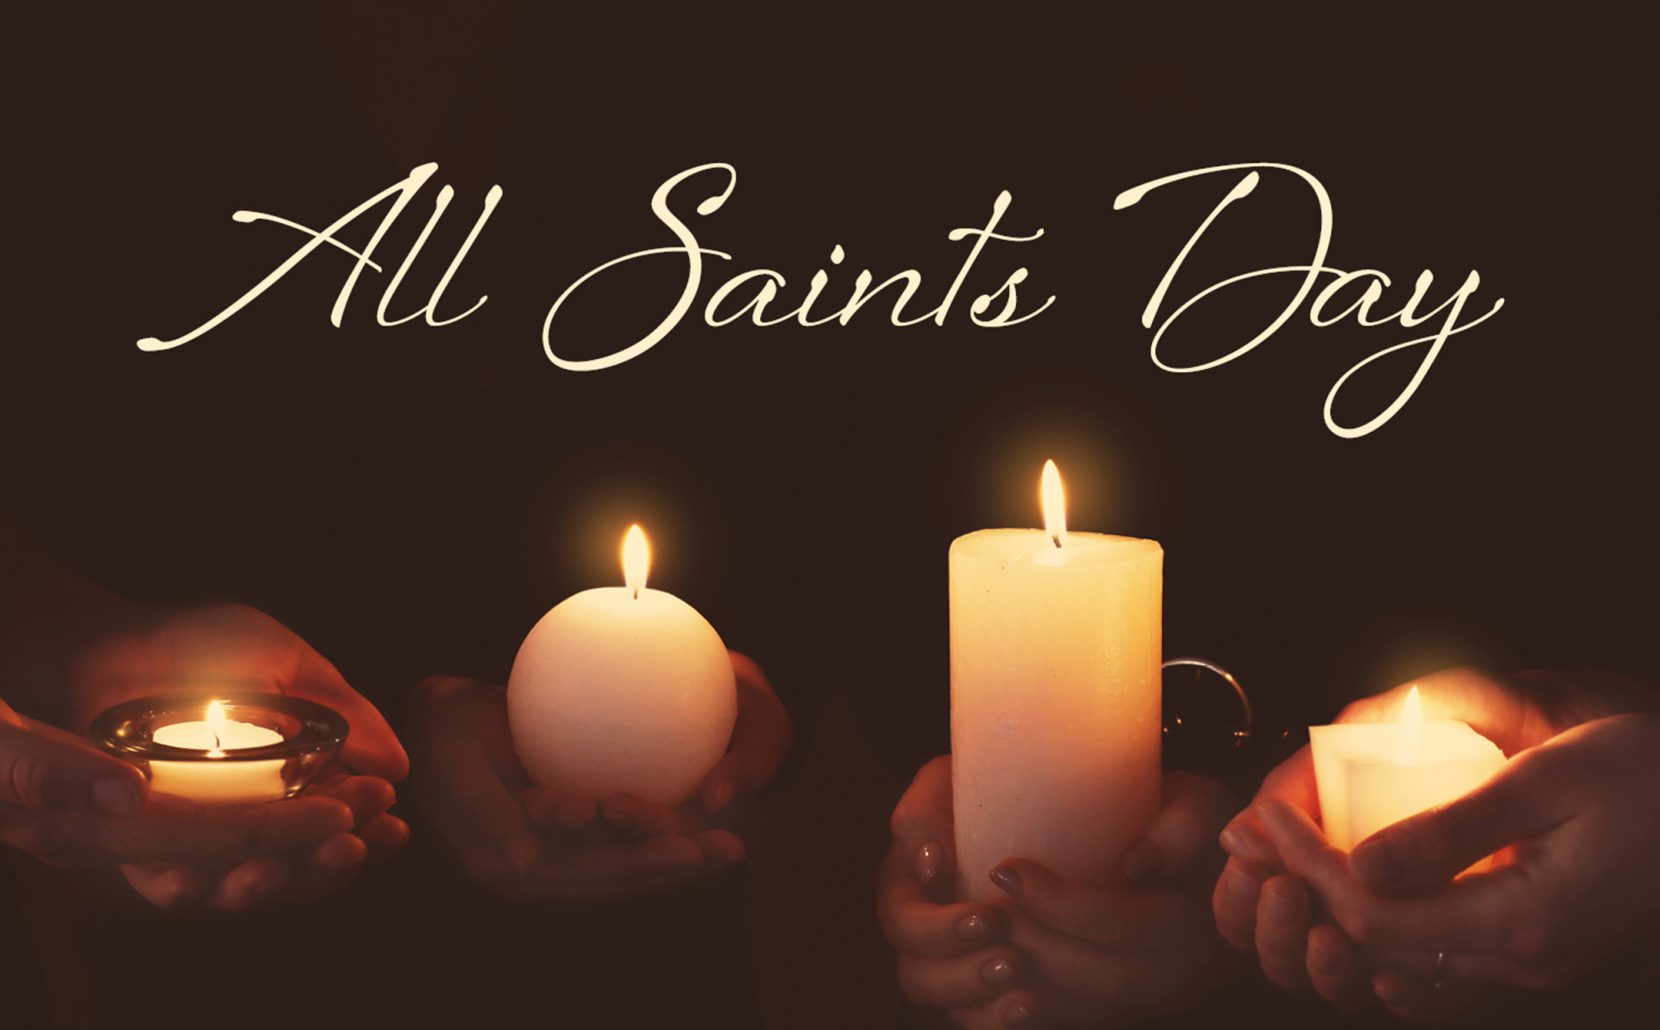 Saints Among Us on All Saints Day Sisters of Charity of the Blessed